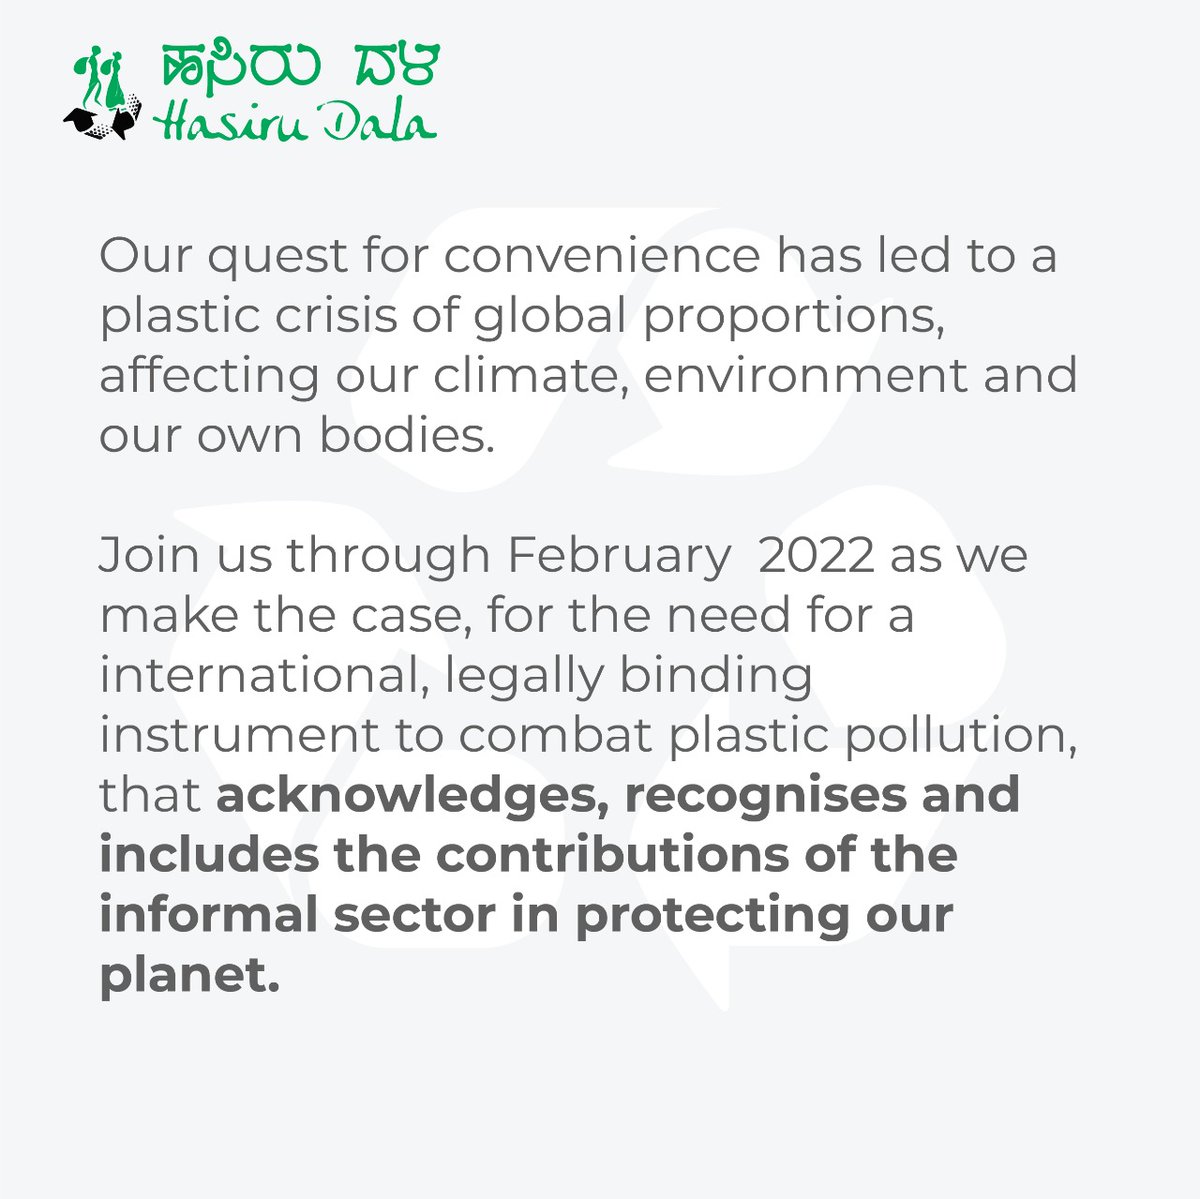 #ChasingArrows
As govts and international orgs take steps to combat plastic pollution, join us in Feb 2022 as we speak of  need for a legally binding instrument to combat plastic pollution that acknowledges, recognises & includes the contributions of the informal sector.